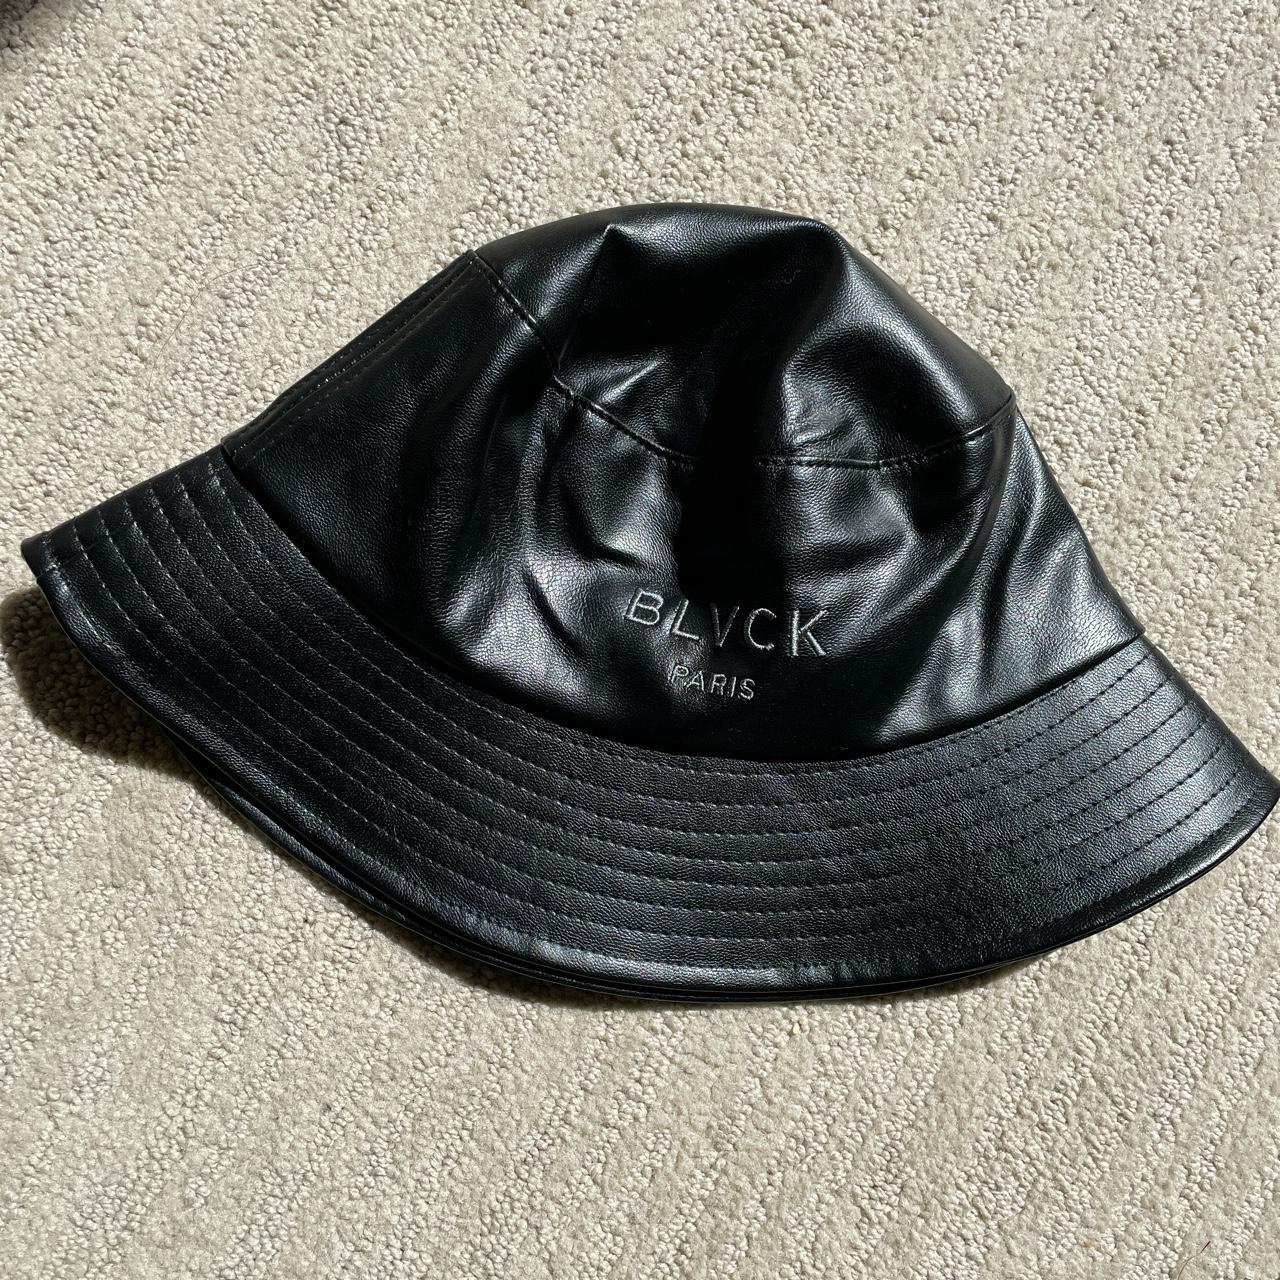 Product Image 1 - BLVCK bucket hat🖤
got this sent